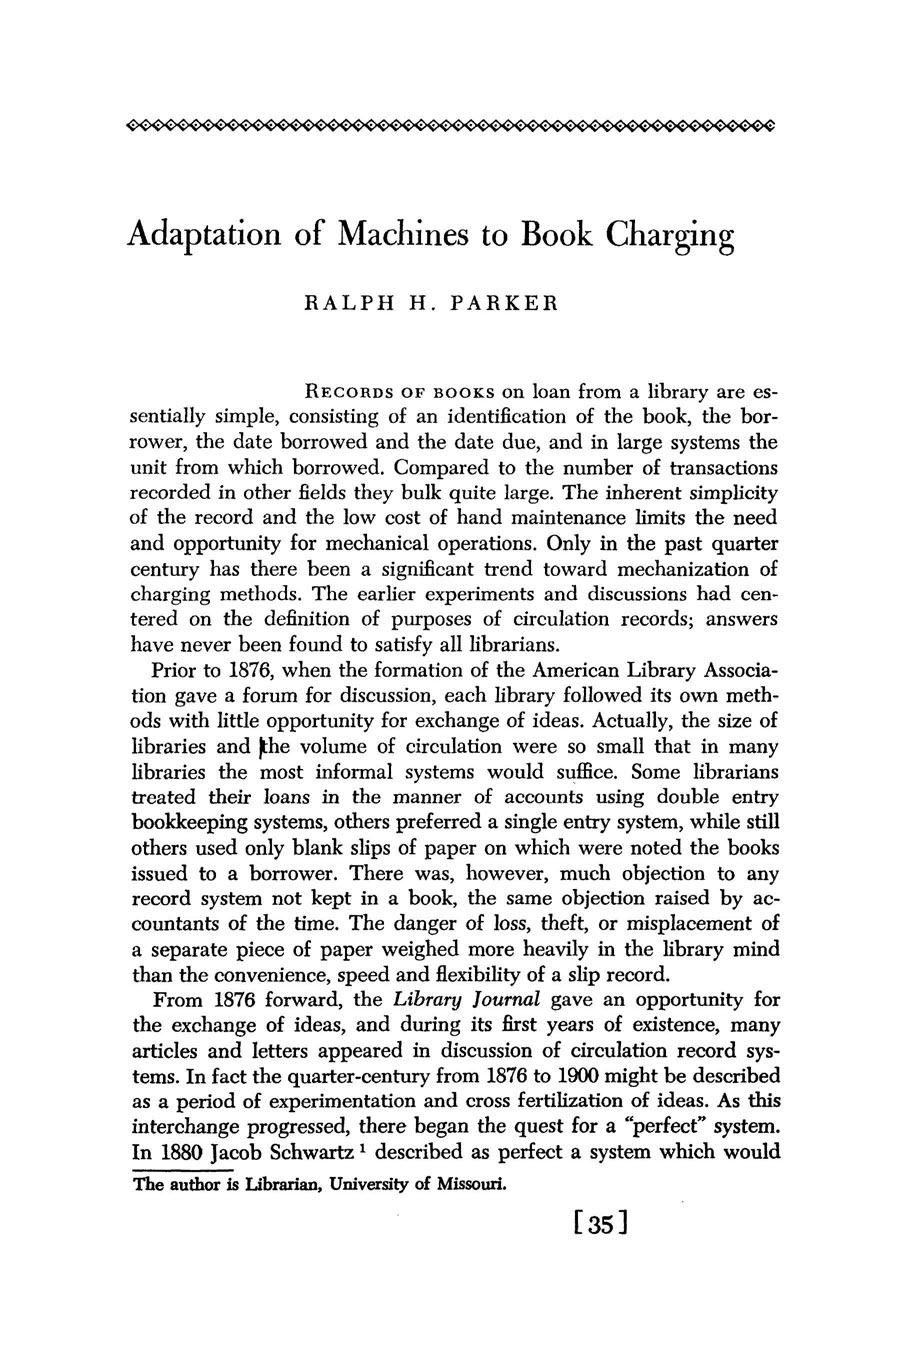 Adaptation of Machines to Book Charging RECORDSOF BOOKS on loan from a library are essentially simple, consisting of an identification of the book, the borrower, the date borrowed and the date due,